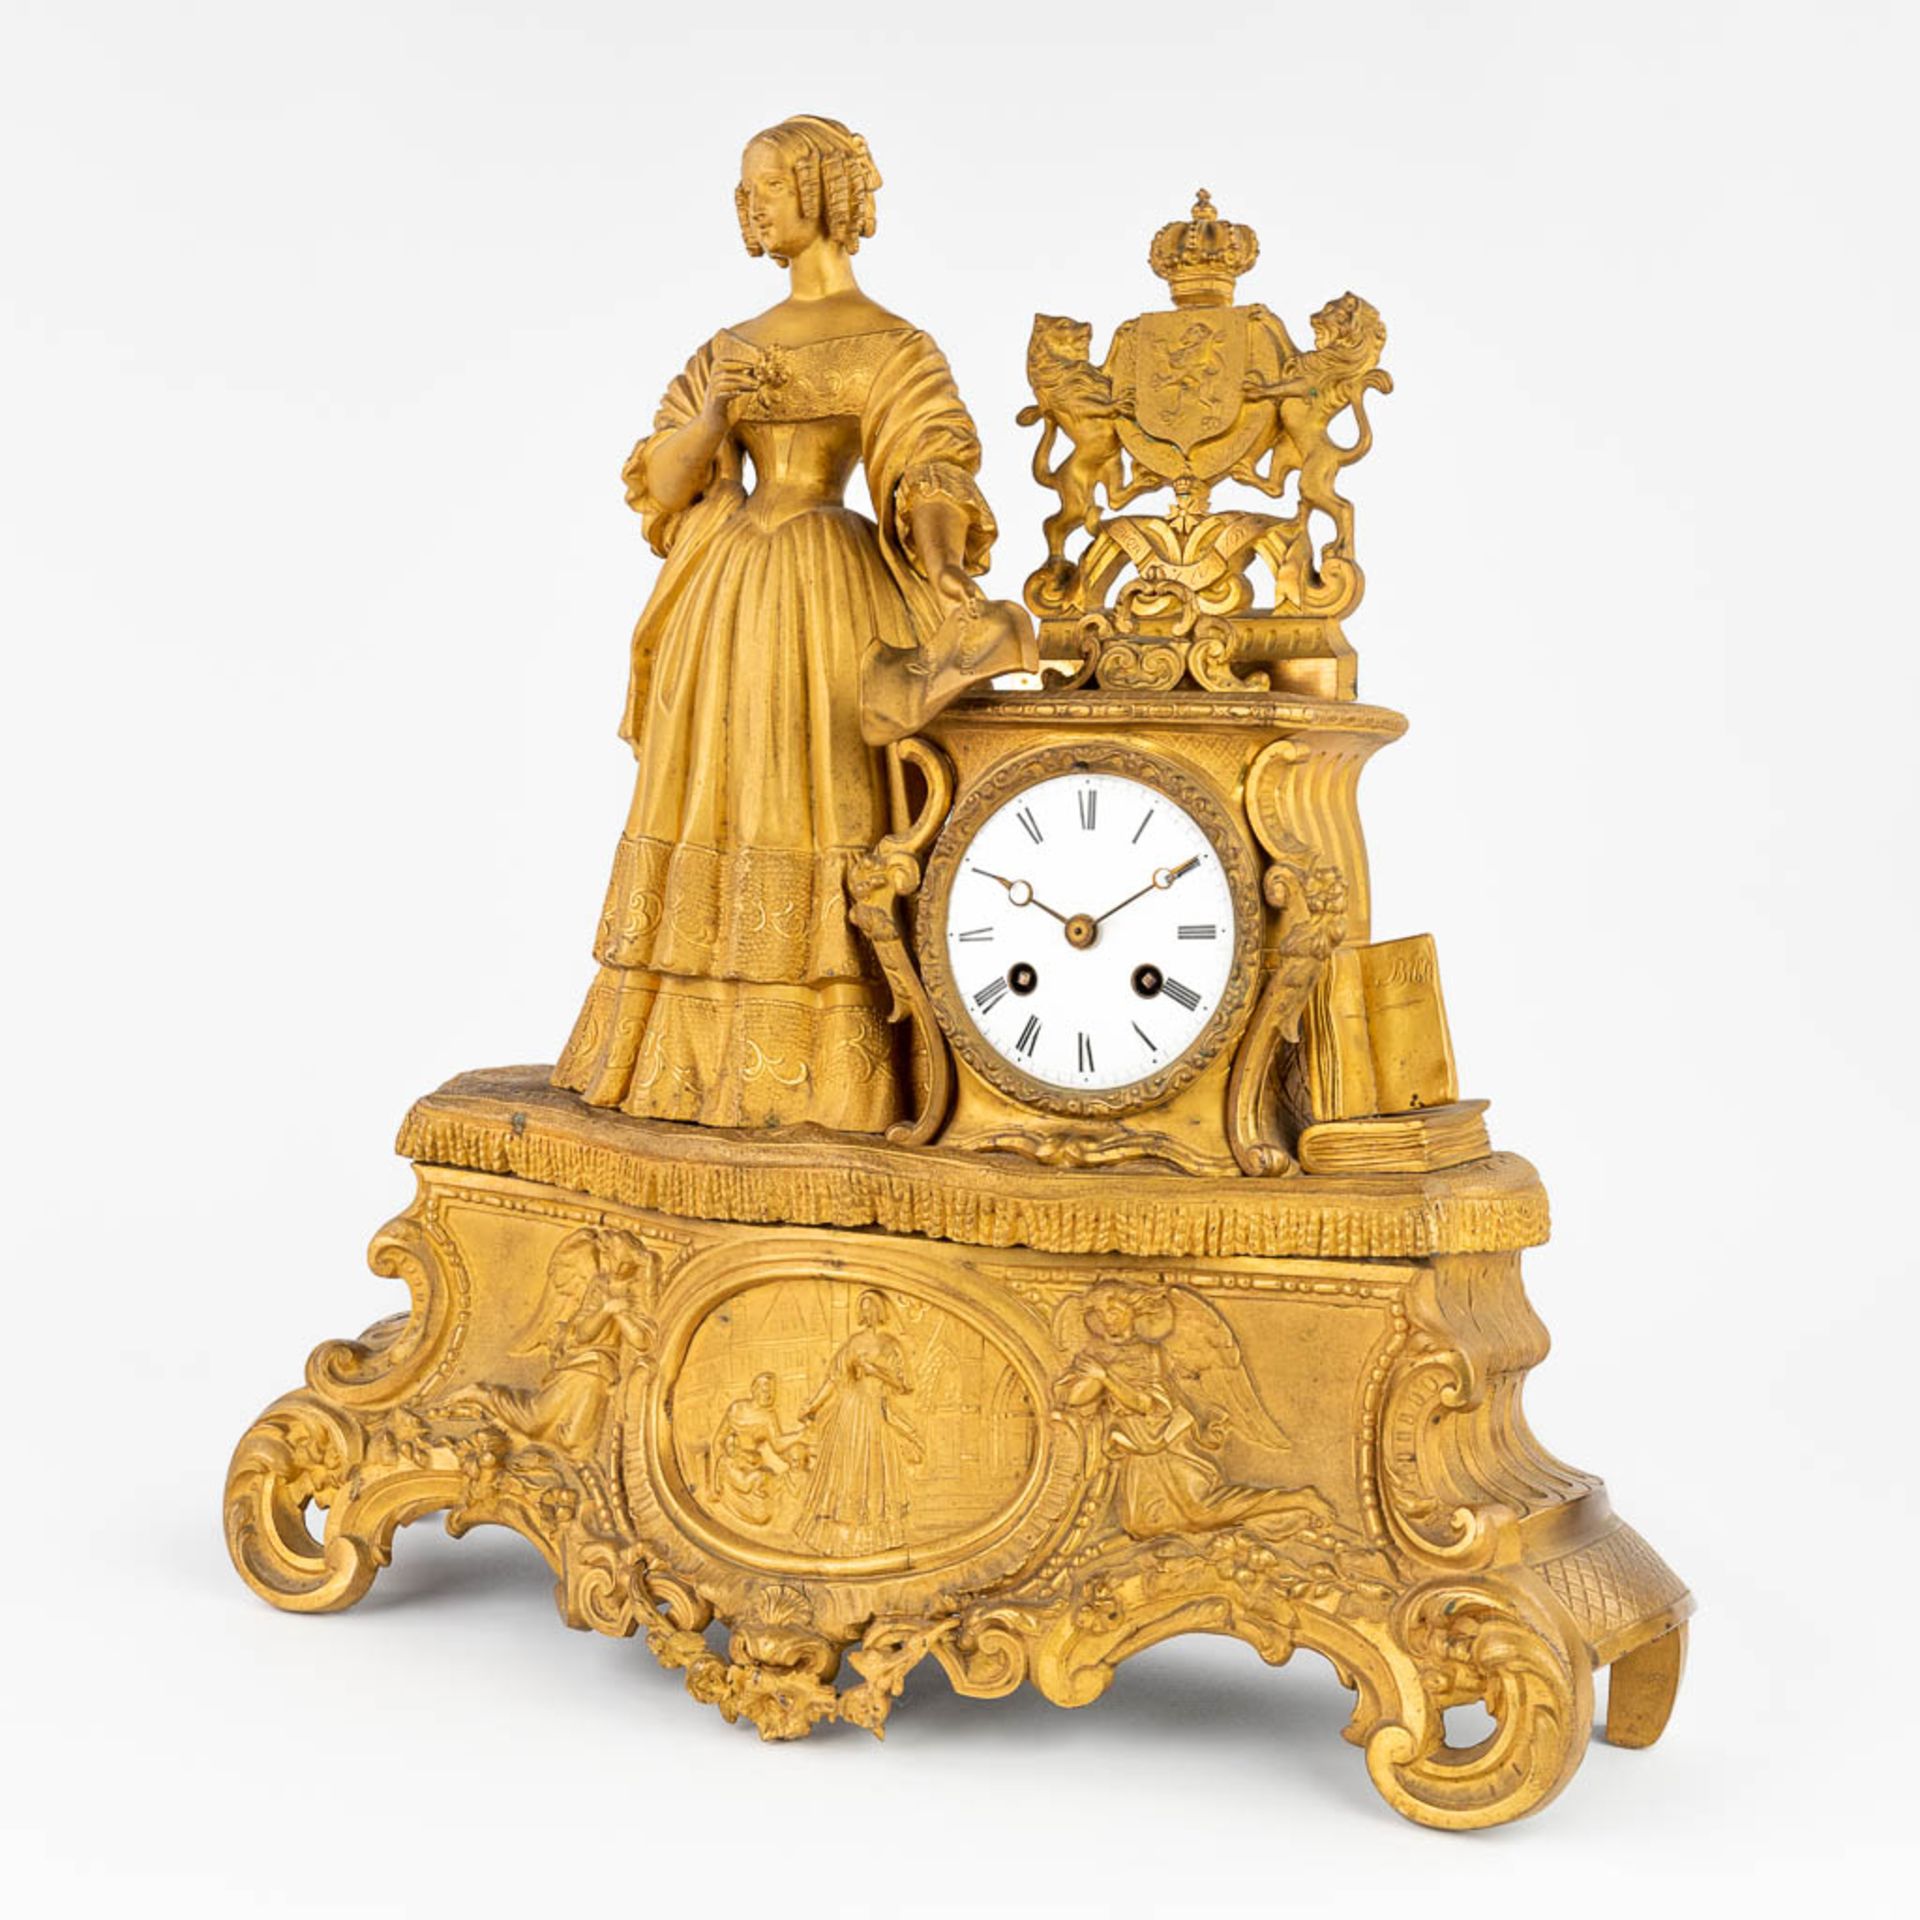 An antique mantle clock made of gilt spelter. 19th C. (44 x 45cm) - Image 9 of 16